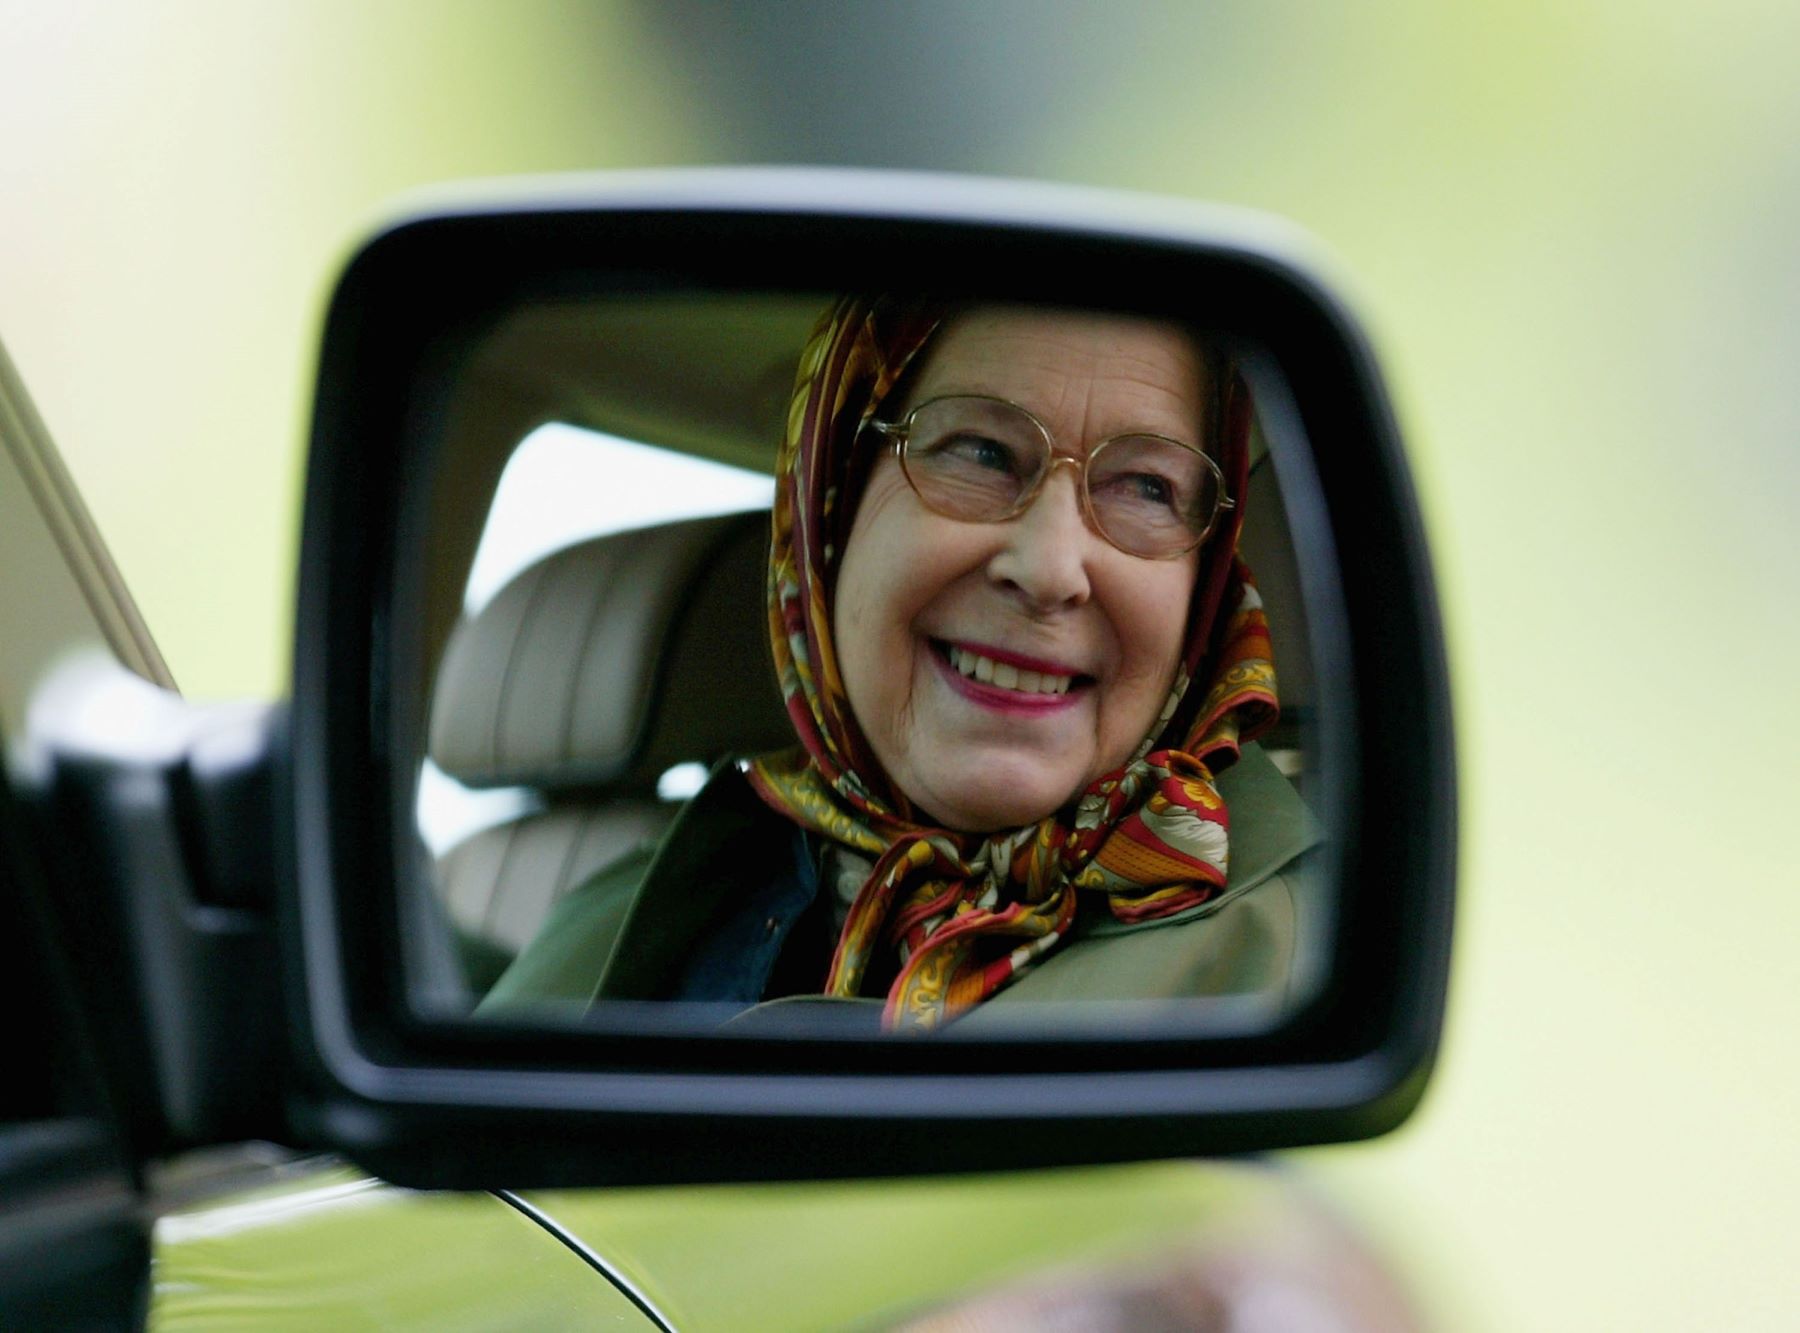 Queen Elizabeth II reflected in a mirror of a Land Rover as she competes in the Driving Grand Prix in Windsor, England